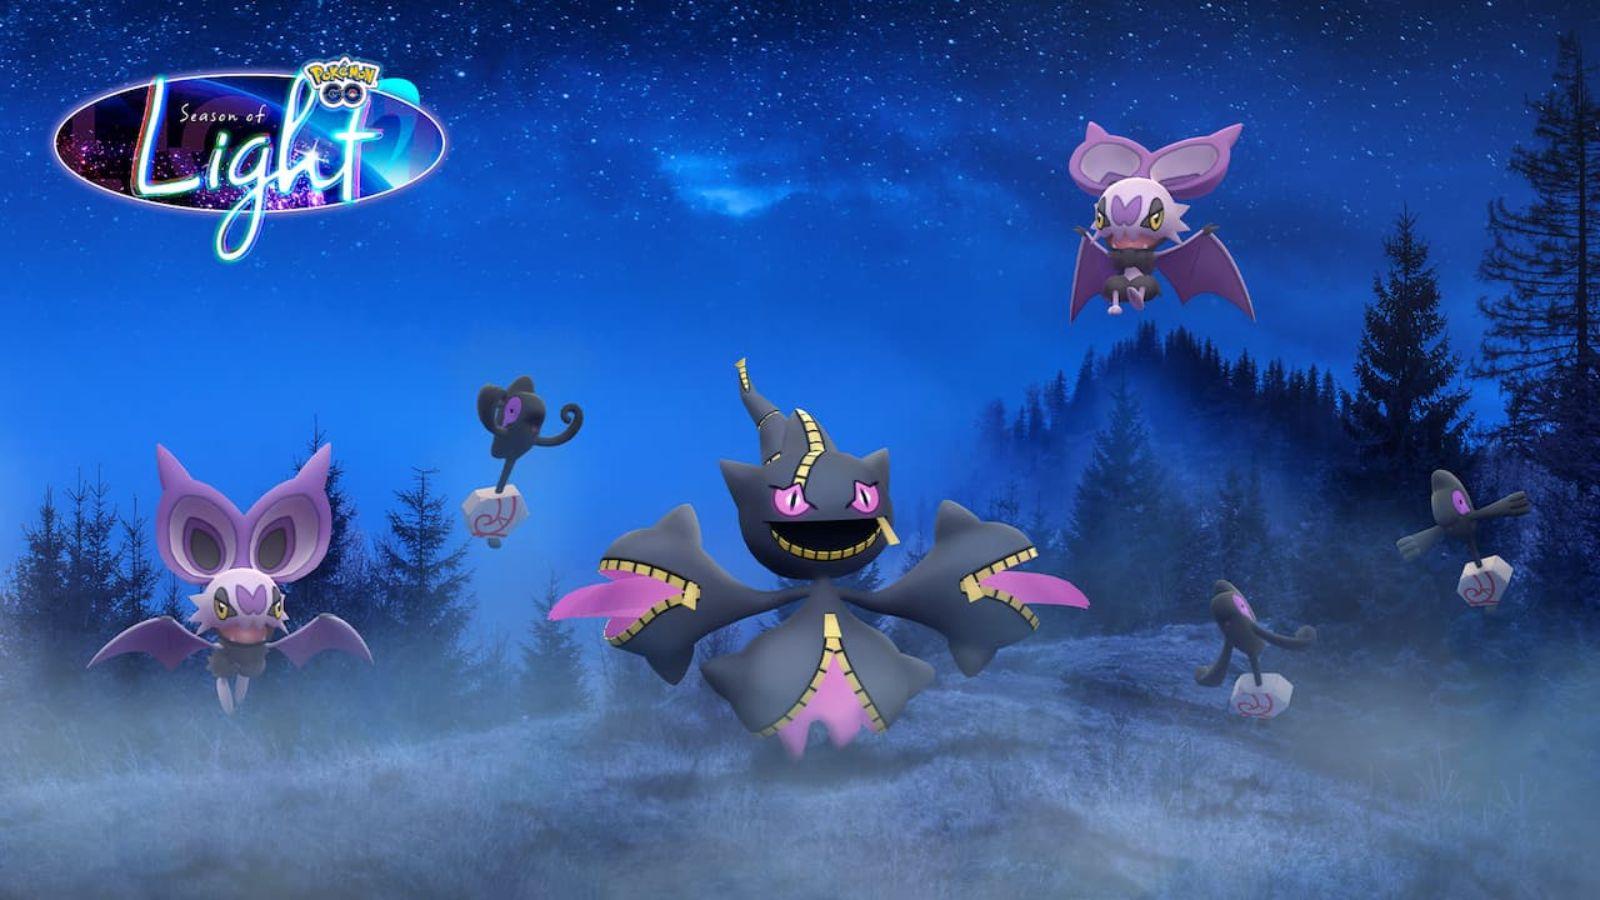 Pokemon GO Halloween 2018 event WARNING: A Spooky Message quest ends soon,  so start TODAY - Daily Star